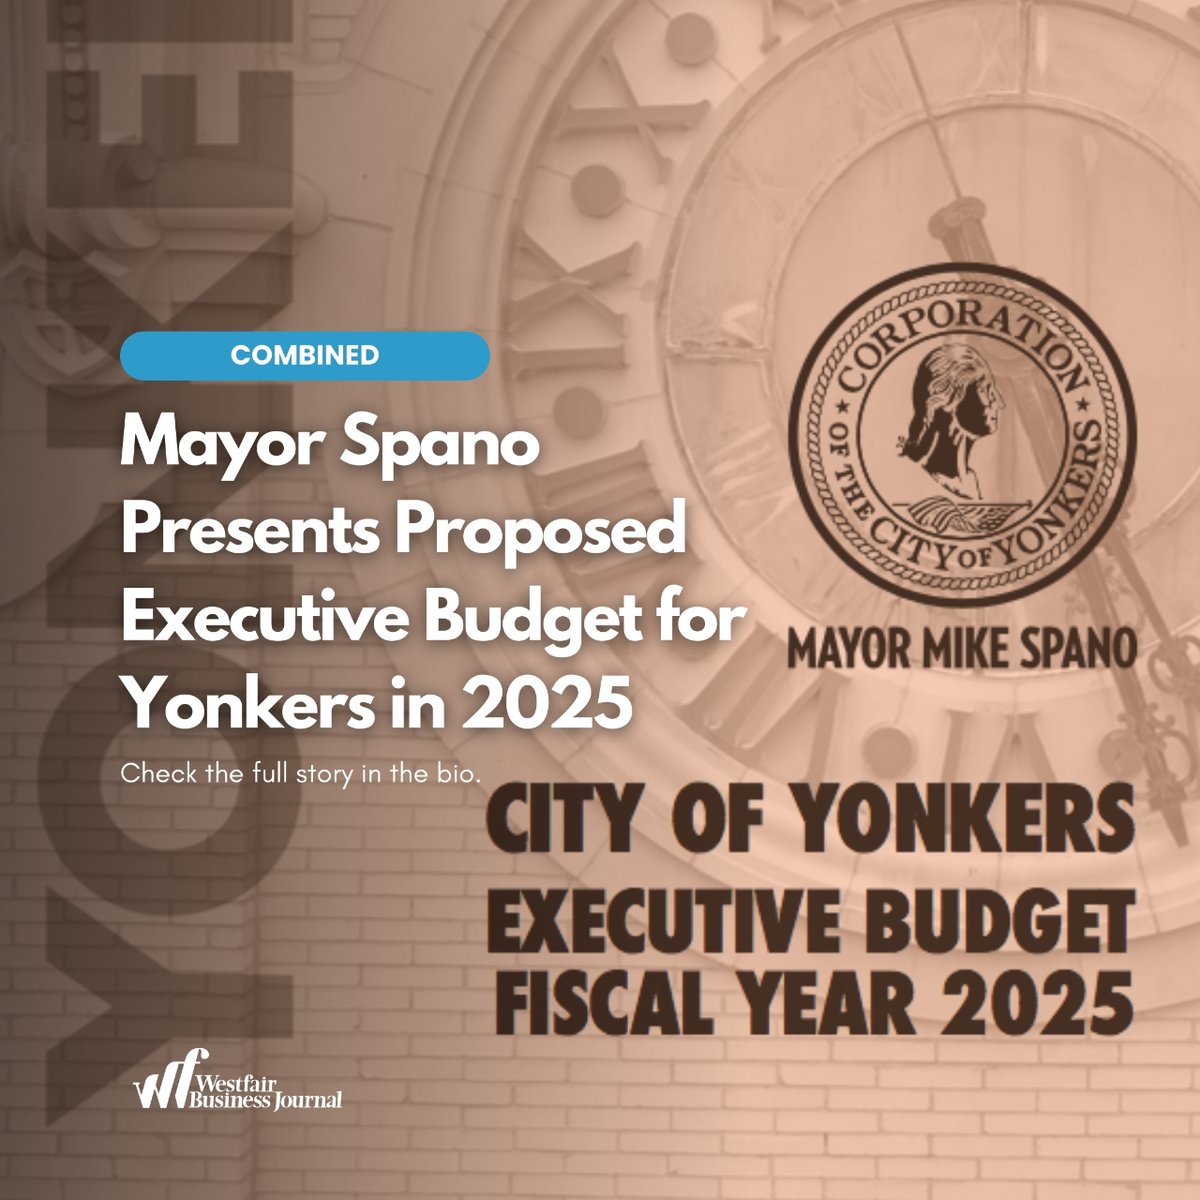 Yonkers Mayor Mike Spano has proposed an executive budget for FY 2025 that totals $1.46 billion, marking an increase of $327 million. 🏫💼

#YonkersBudget2025 #EducationInvestment #TaxReform #SeniorBenefits #CommunityGrowth #YonkersNY

westfaironline.com/combined/yonke…